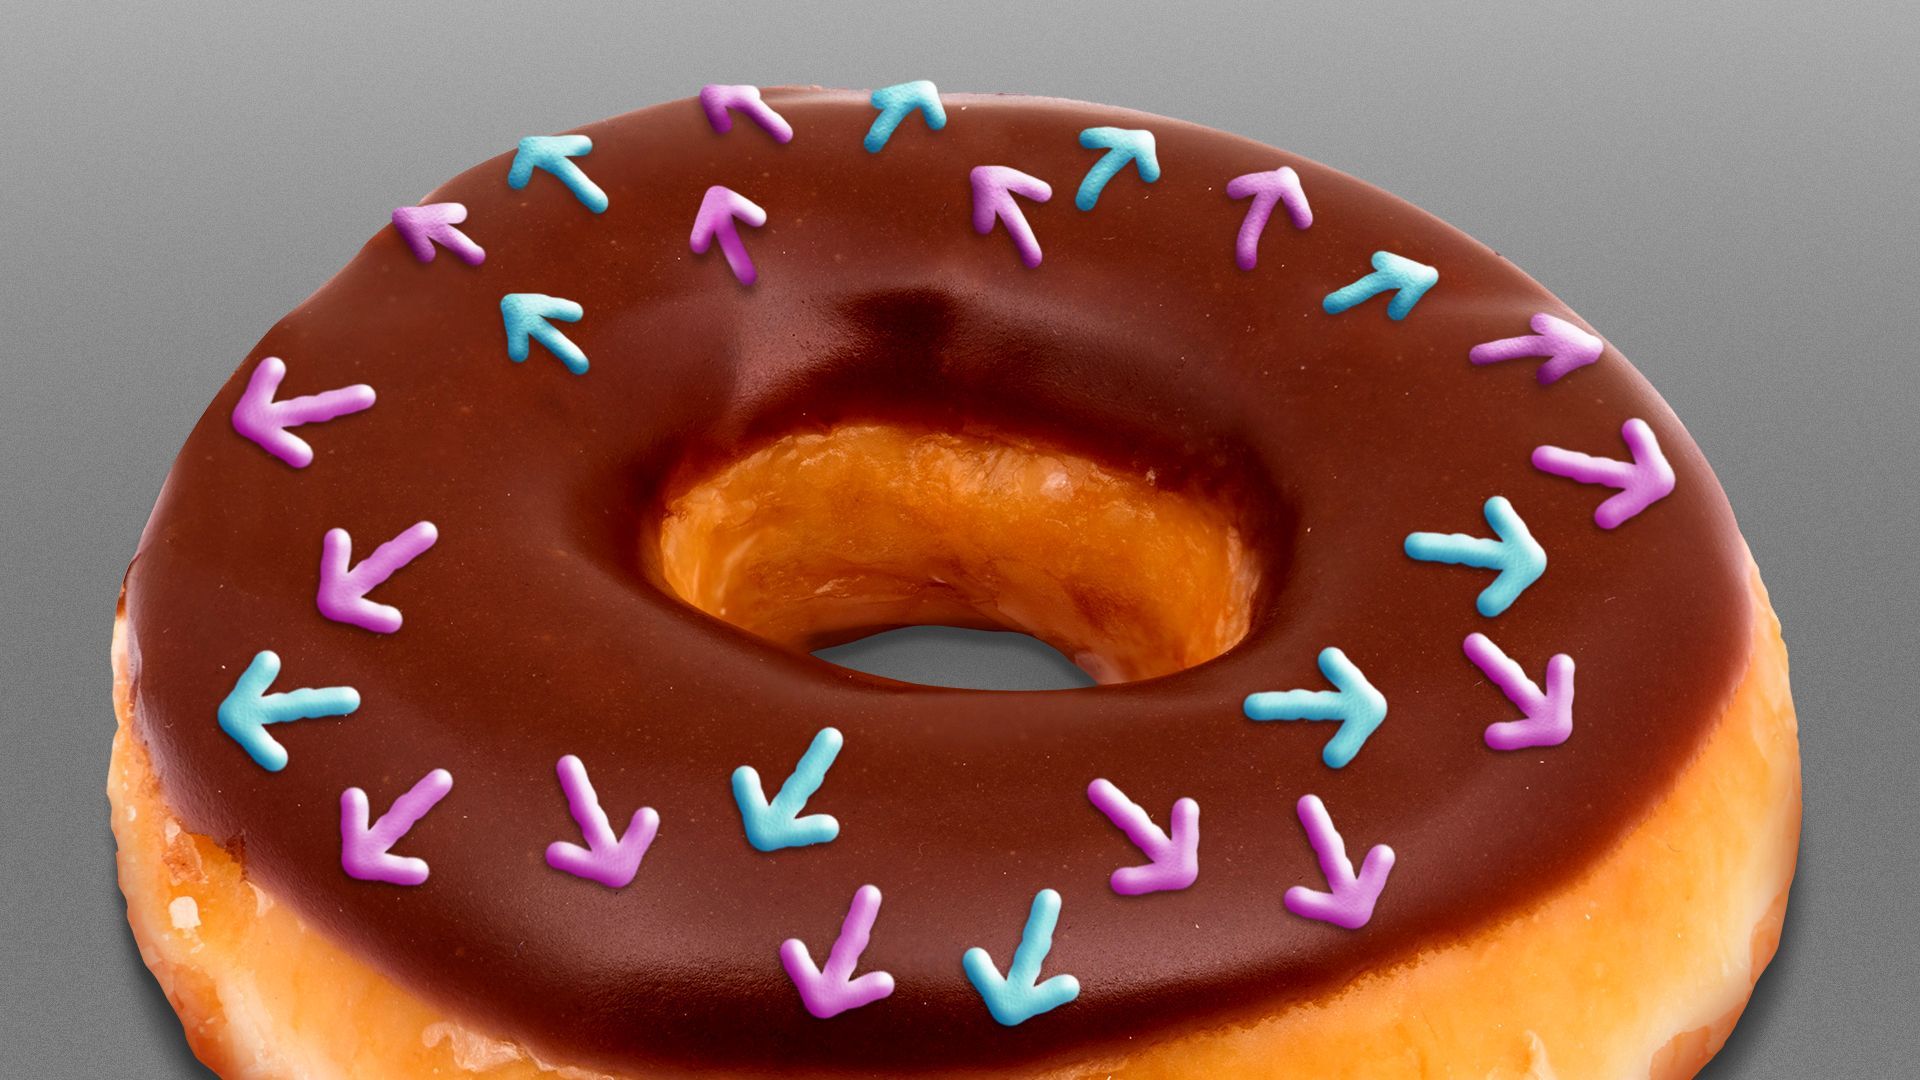 Illustration of a chocolate glazed donut with arrow-shaped sprinkles pointing outwards